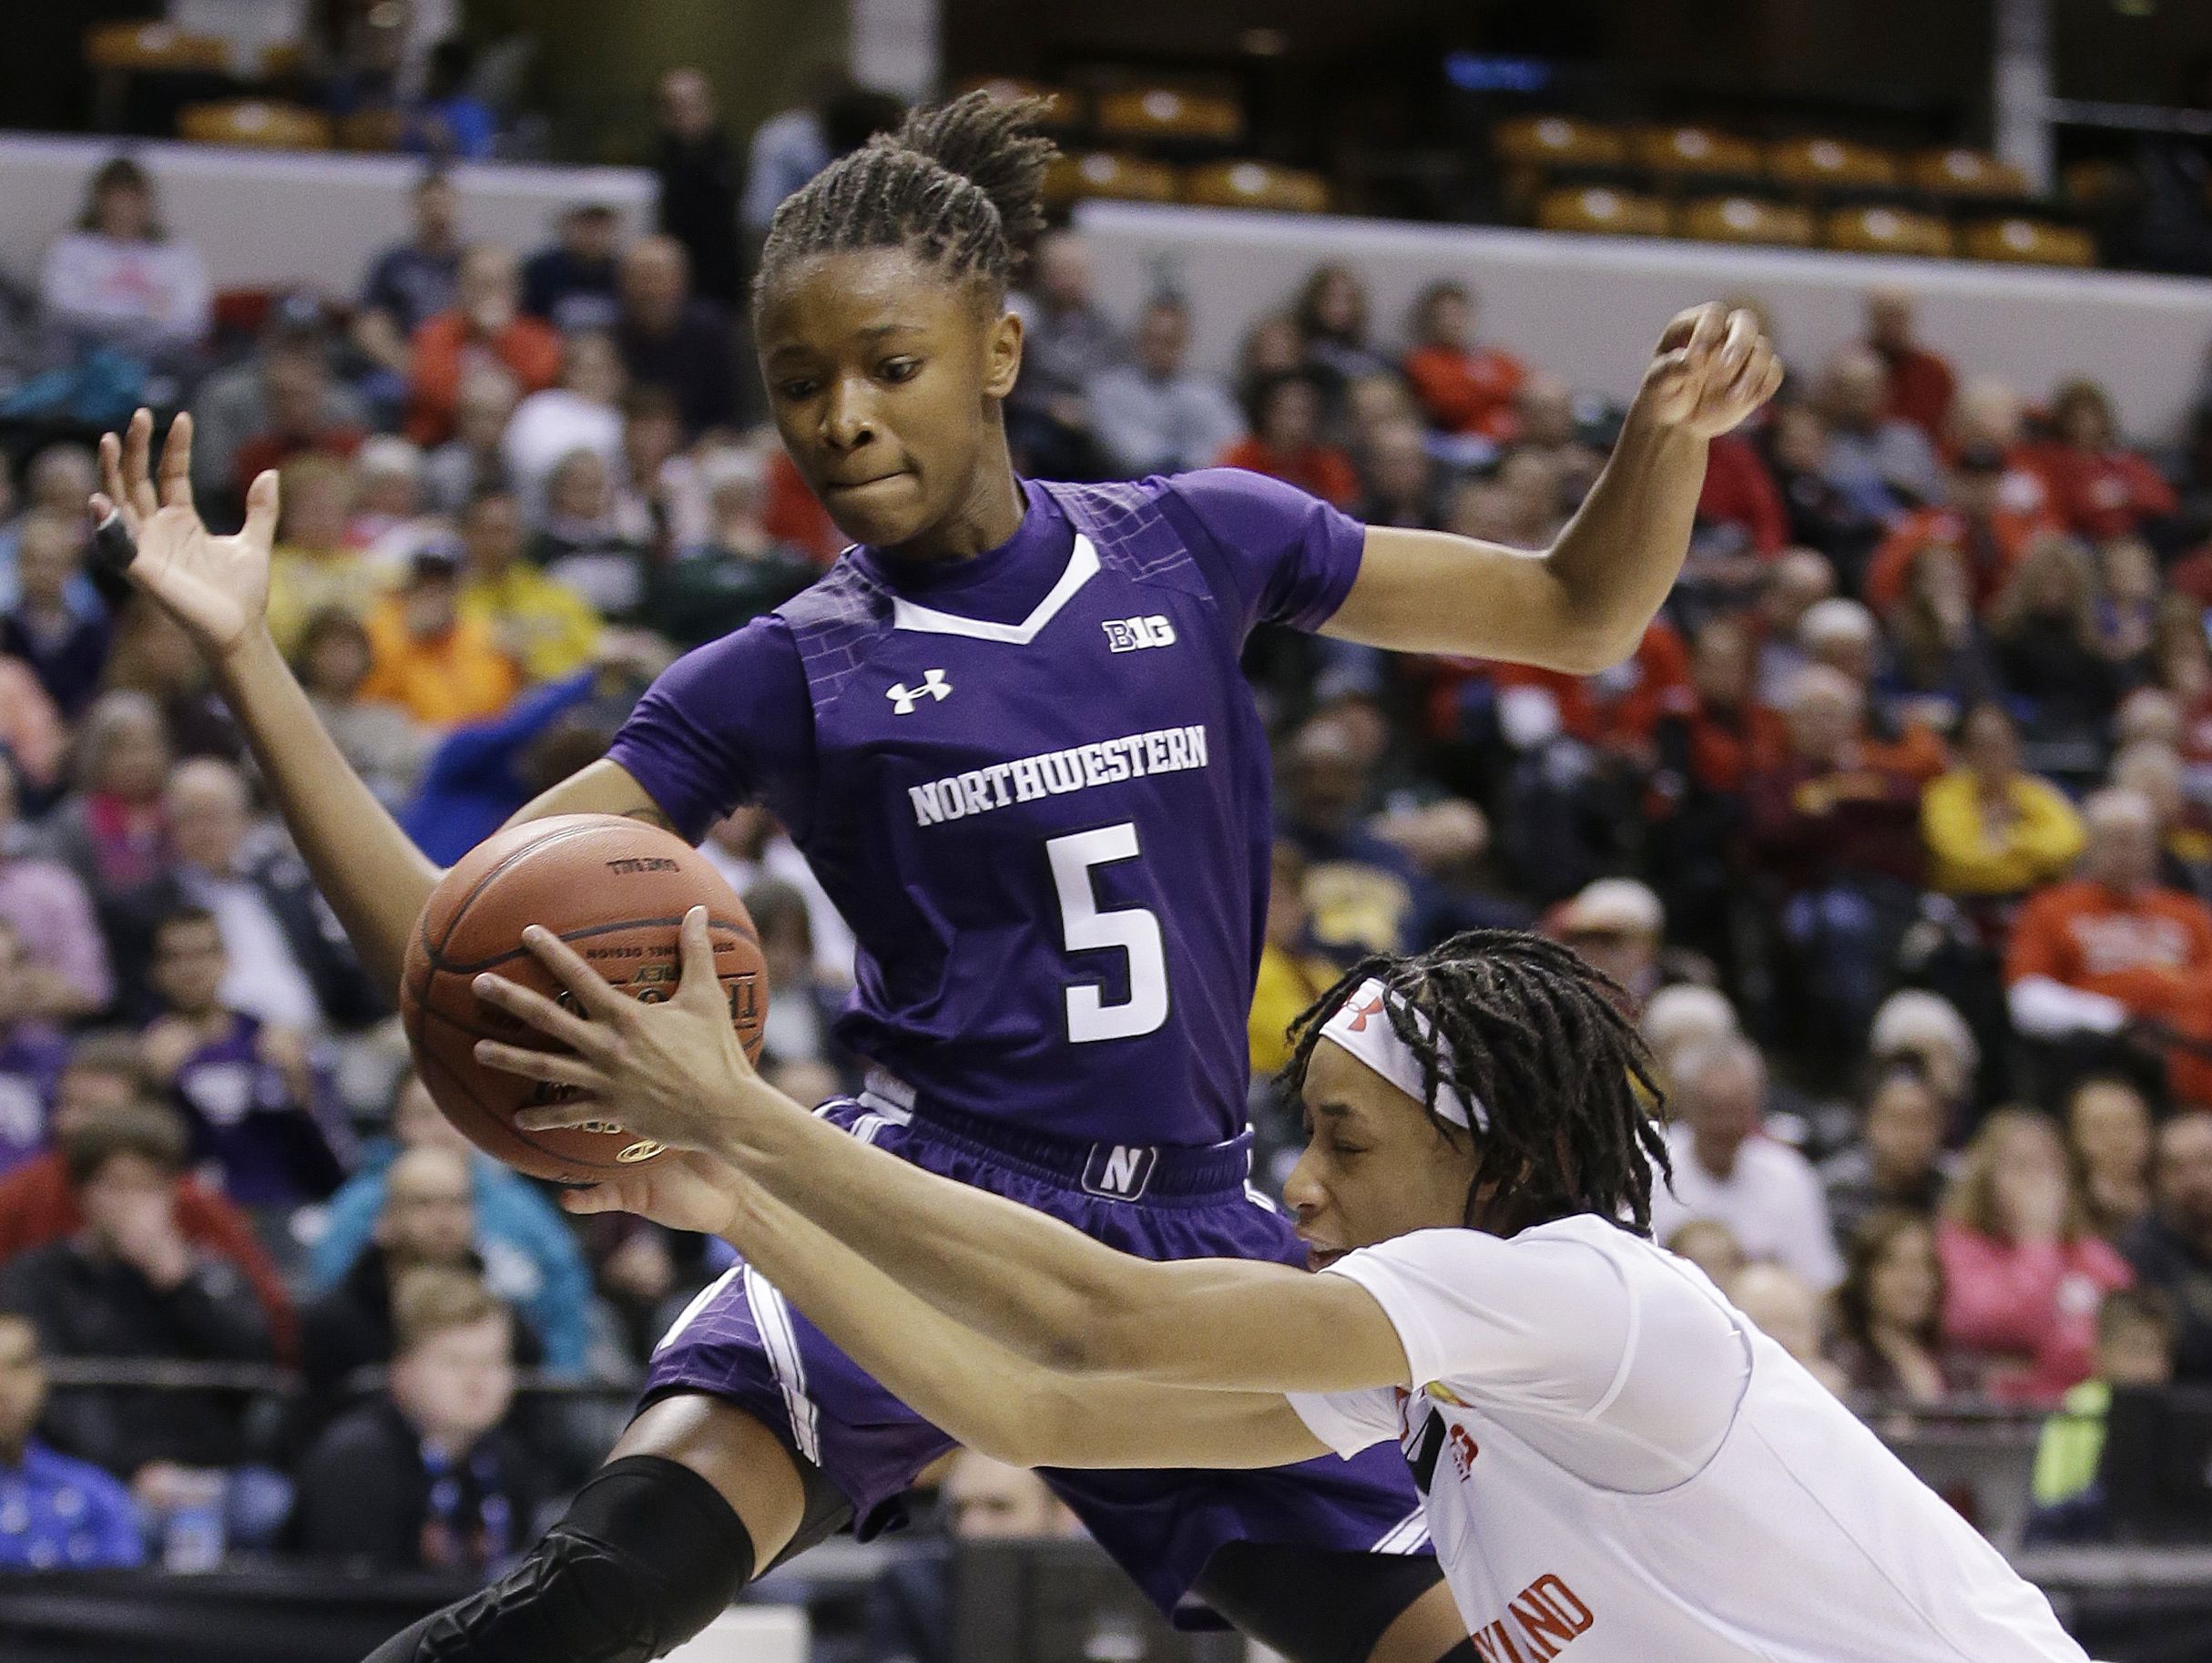 In this March 5, 2016, file photo, Maryland's Brene Moseley (3) and Northwestern's Jordan Hankins (5) go for a loose ball during an NCAA college basketball game at the Big Ten Conference tournament in Indianapolis. Hankins has been found dead in her room at the university.